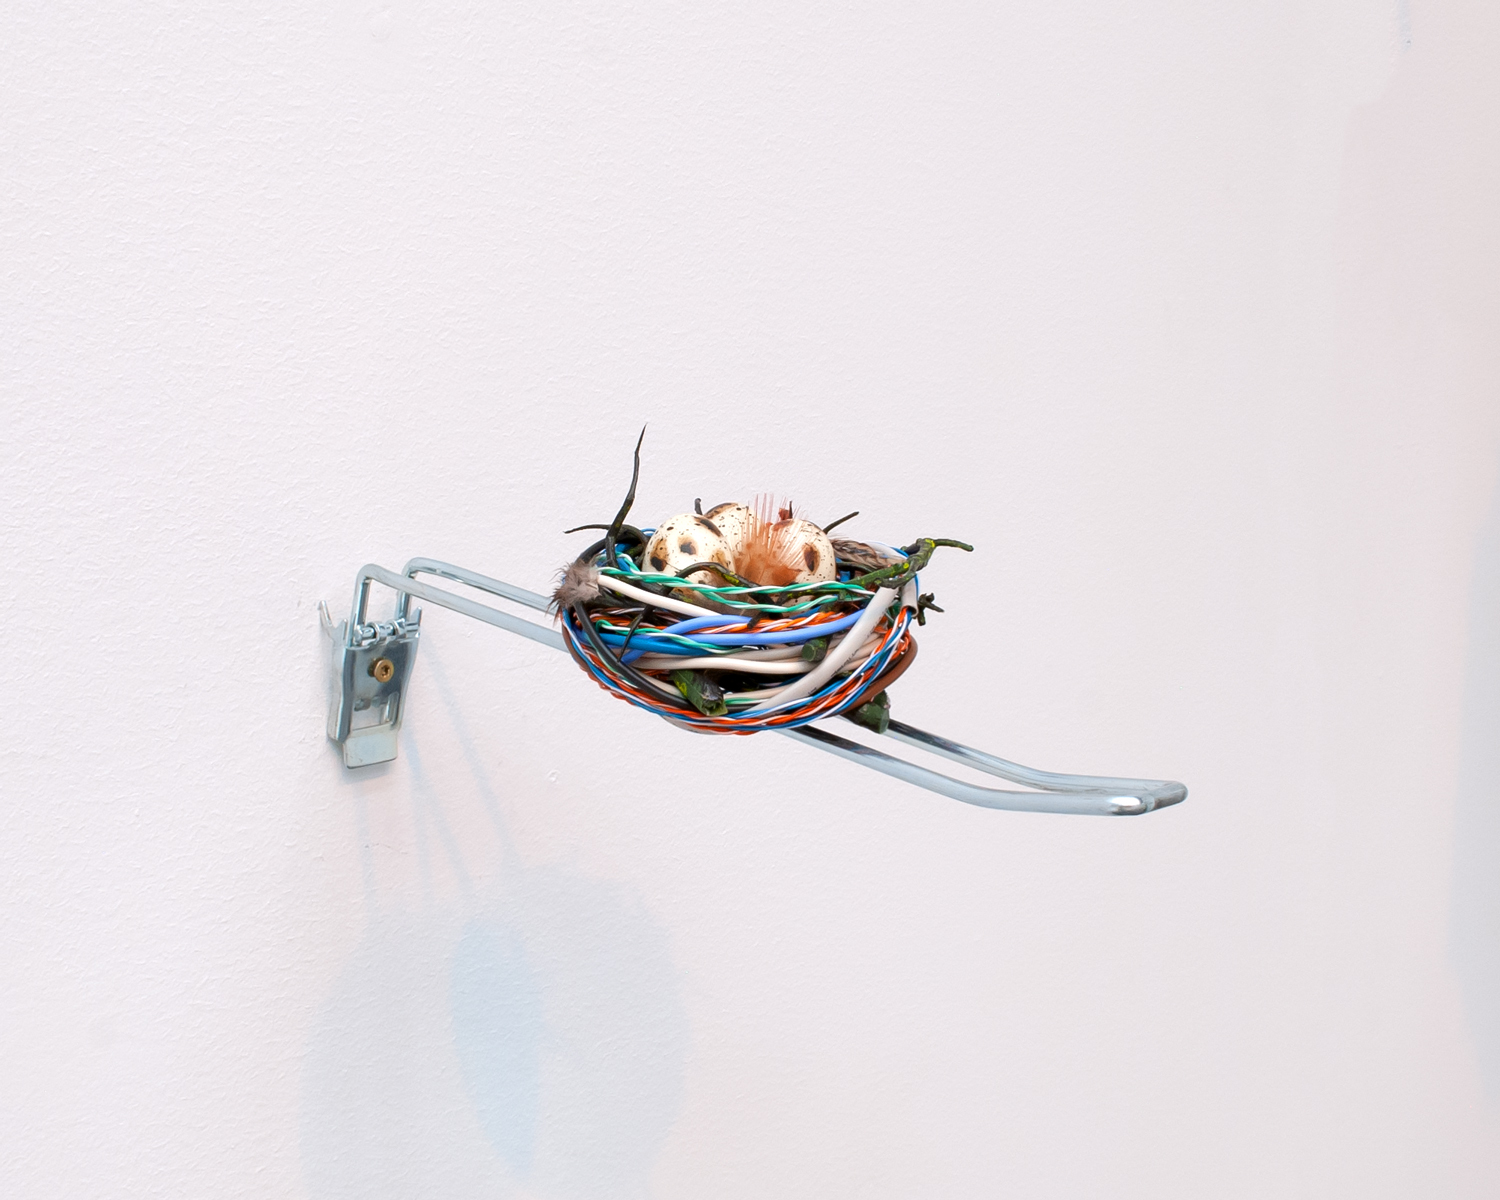 Branch, 2022, Steel, electrical cables, feathers, artificial eggs, 10x10x32cm